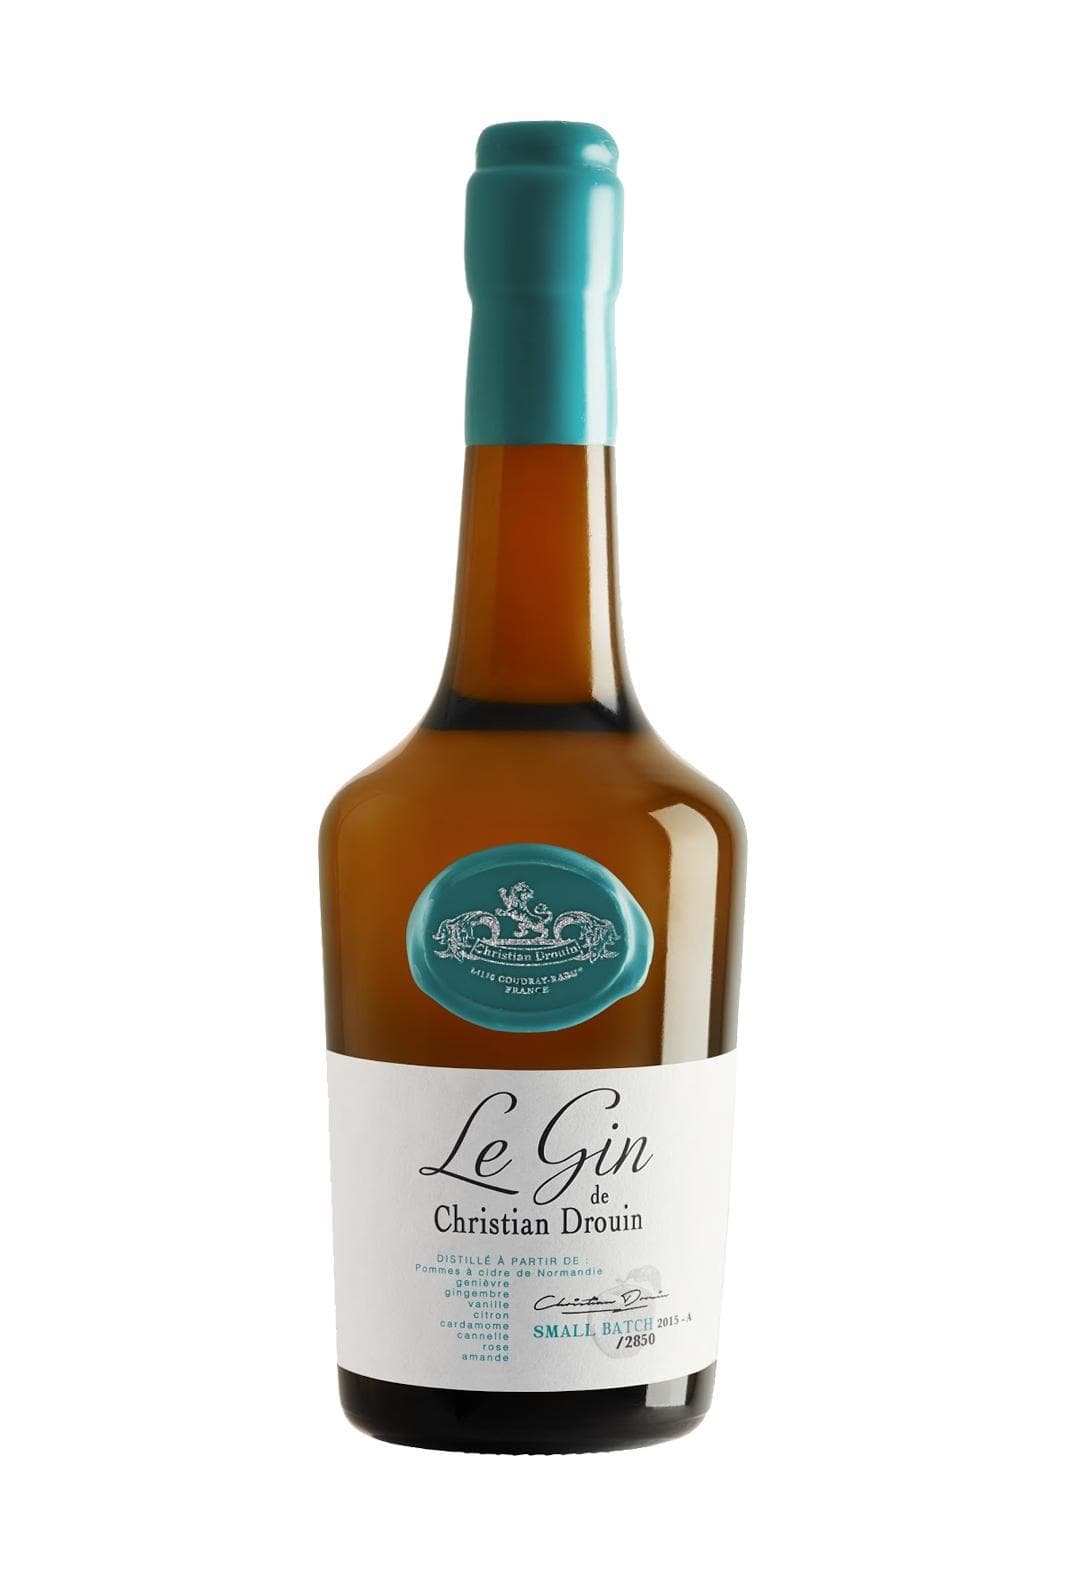 Christian Drouin Gin 'Le Gin Blanc' 42% 700ml | Gin | Shop online at Spirits of France